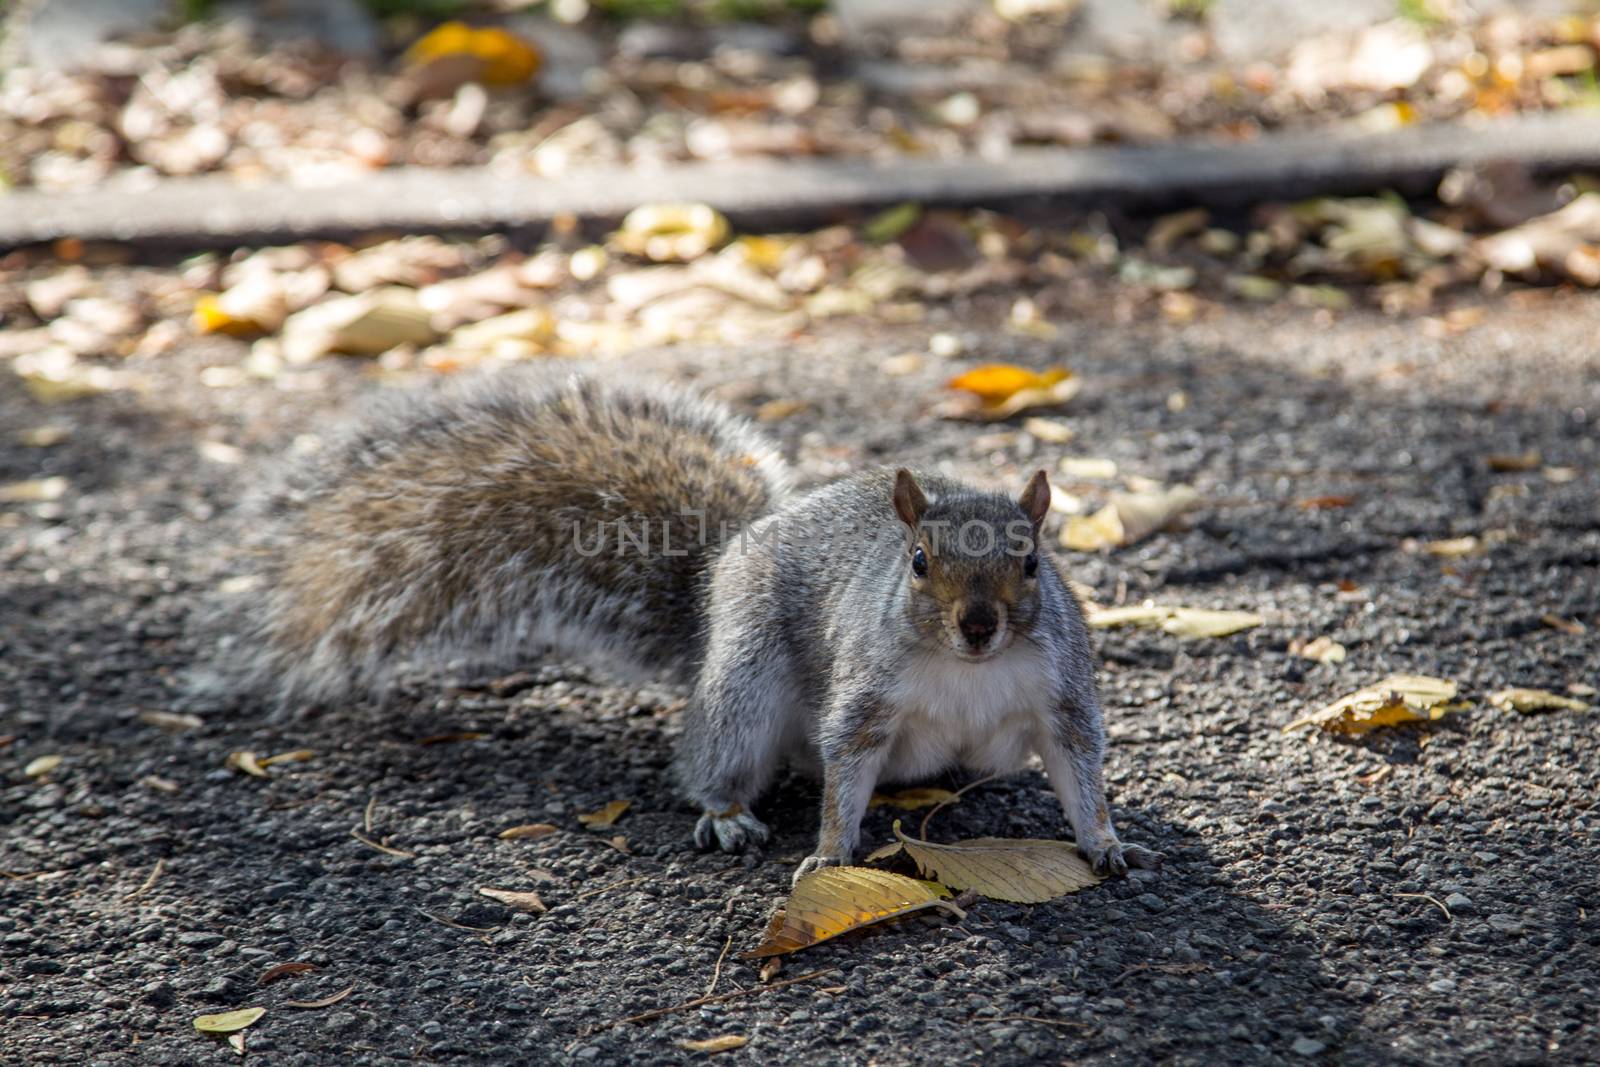 Closeup of a squirrel in a public park in New York City